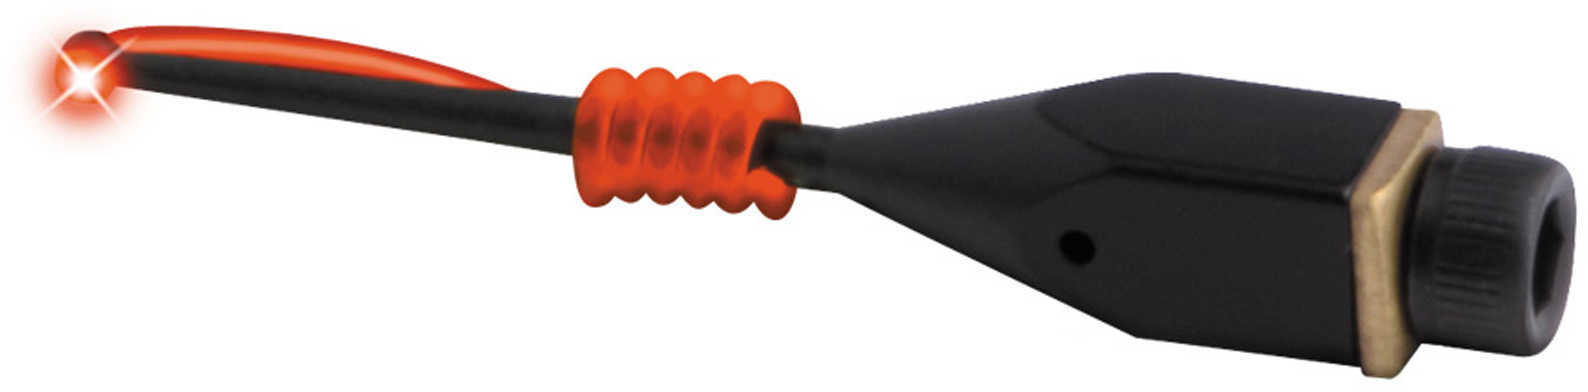 Truglo Pro-Wrap Pin .019 Red TG844WR